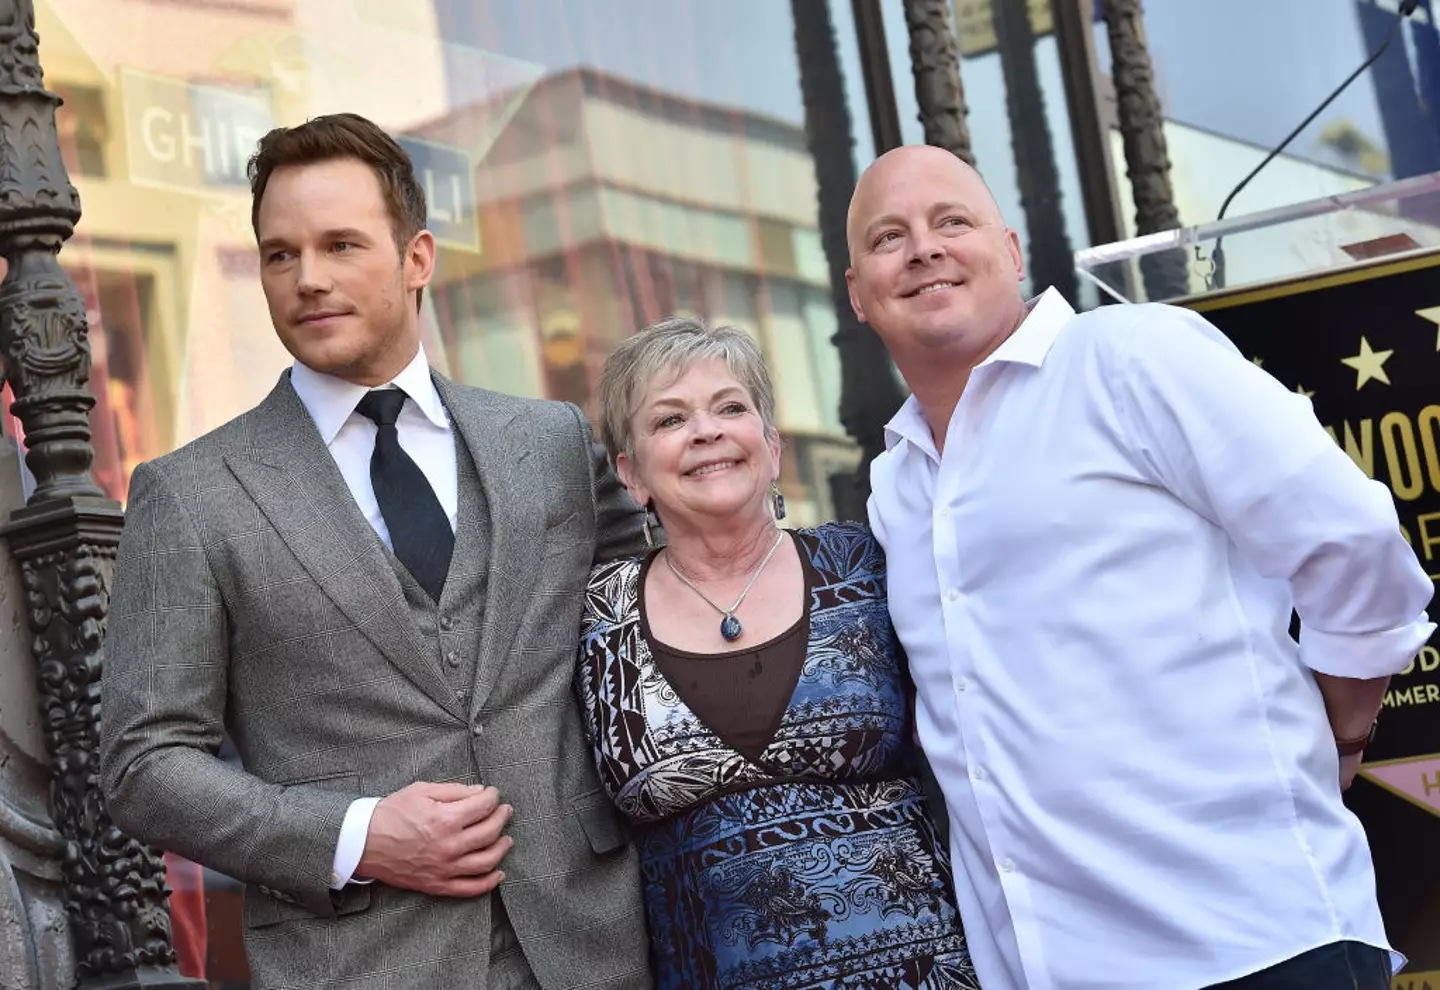 Pratt was able to buy his mom, Kathy Pratt a house (Axelle/Bauer-Griffin/FilmMagic)